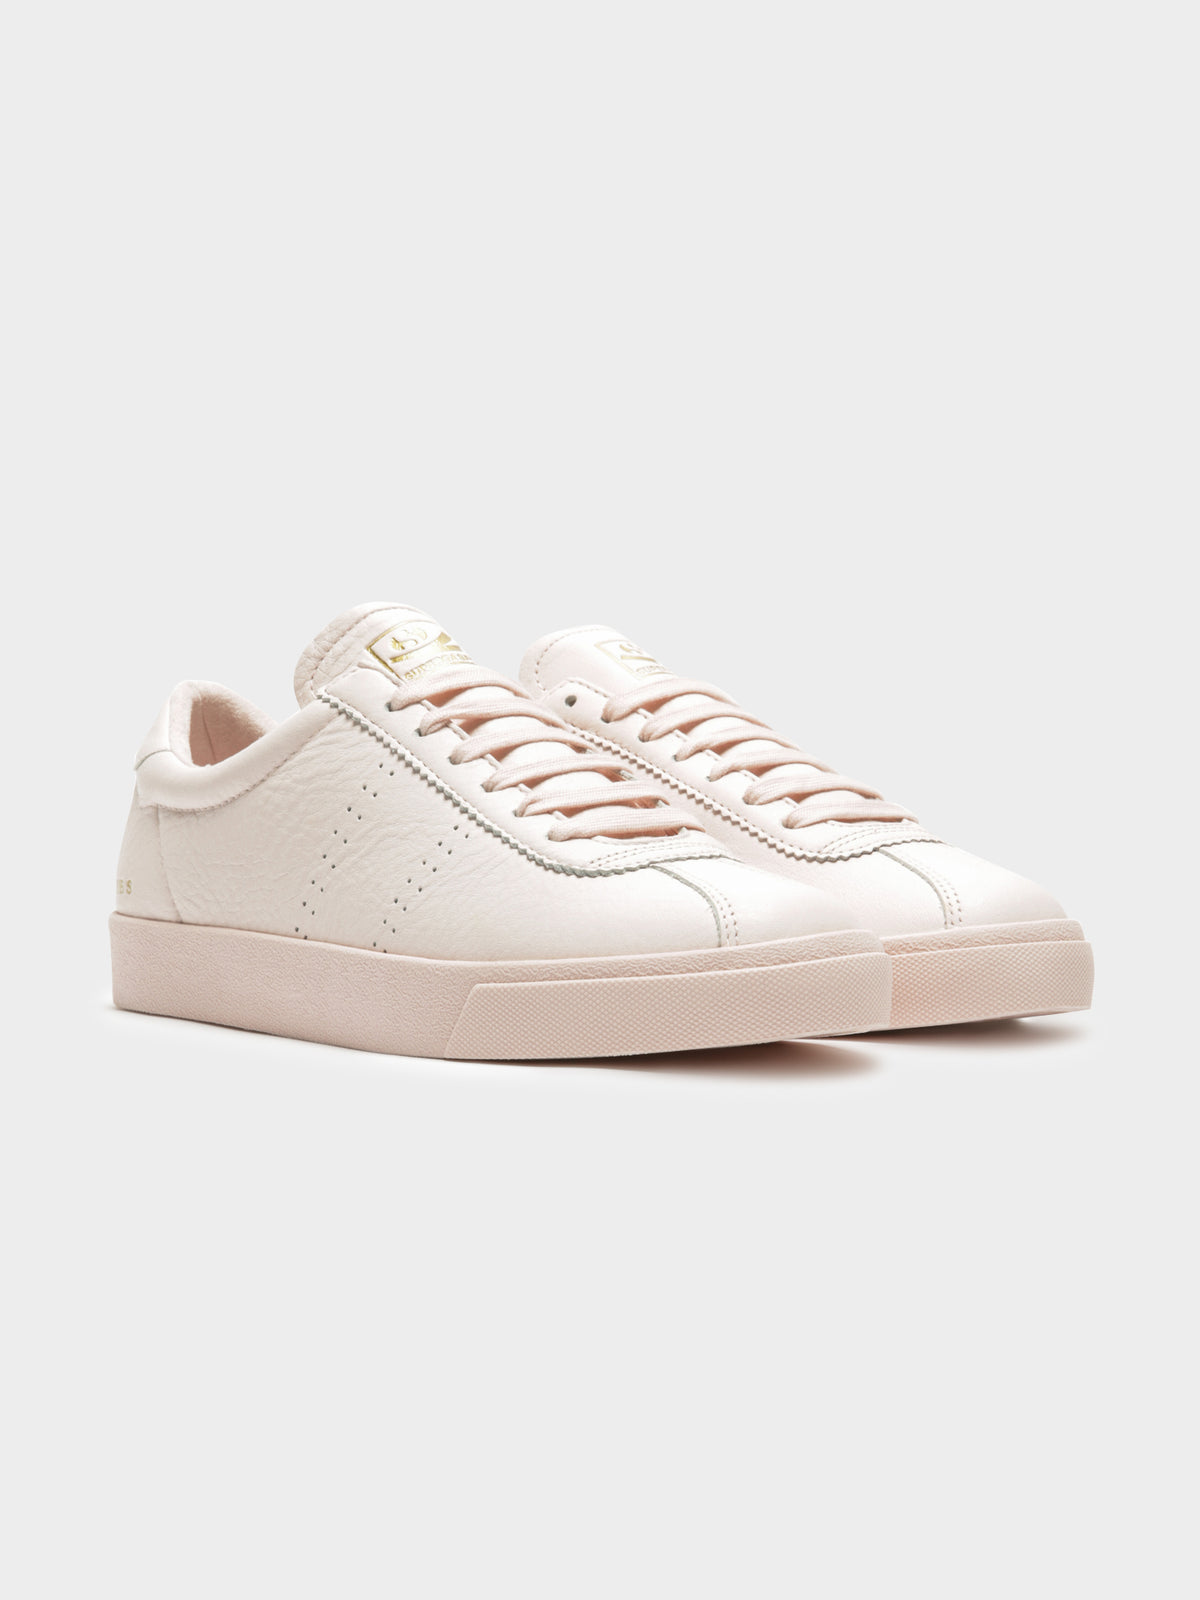 Womens 2843 Tumbled Leather Sneakers in Pink